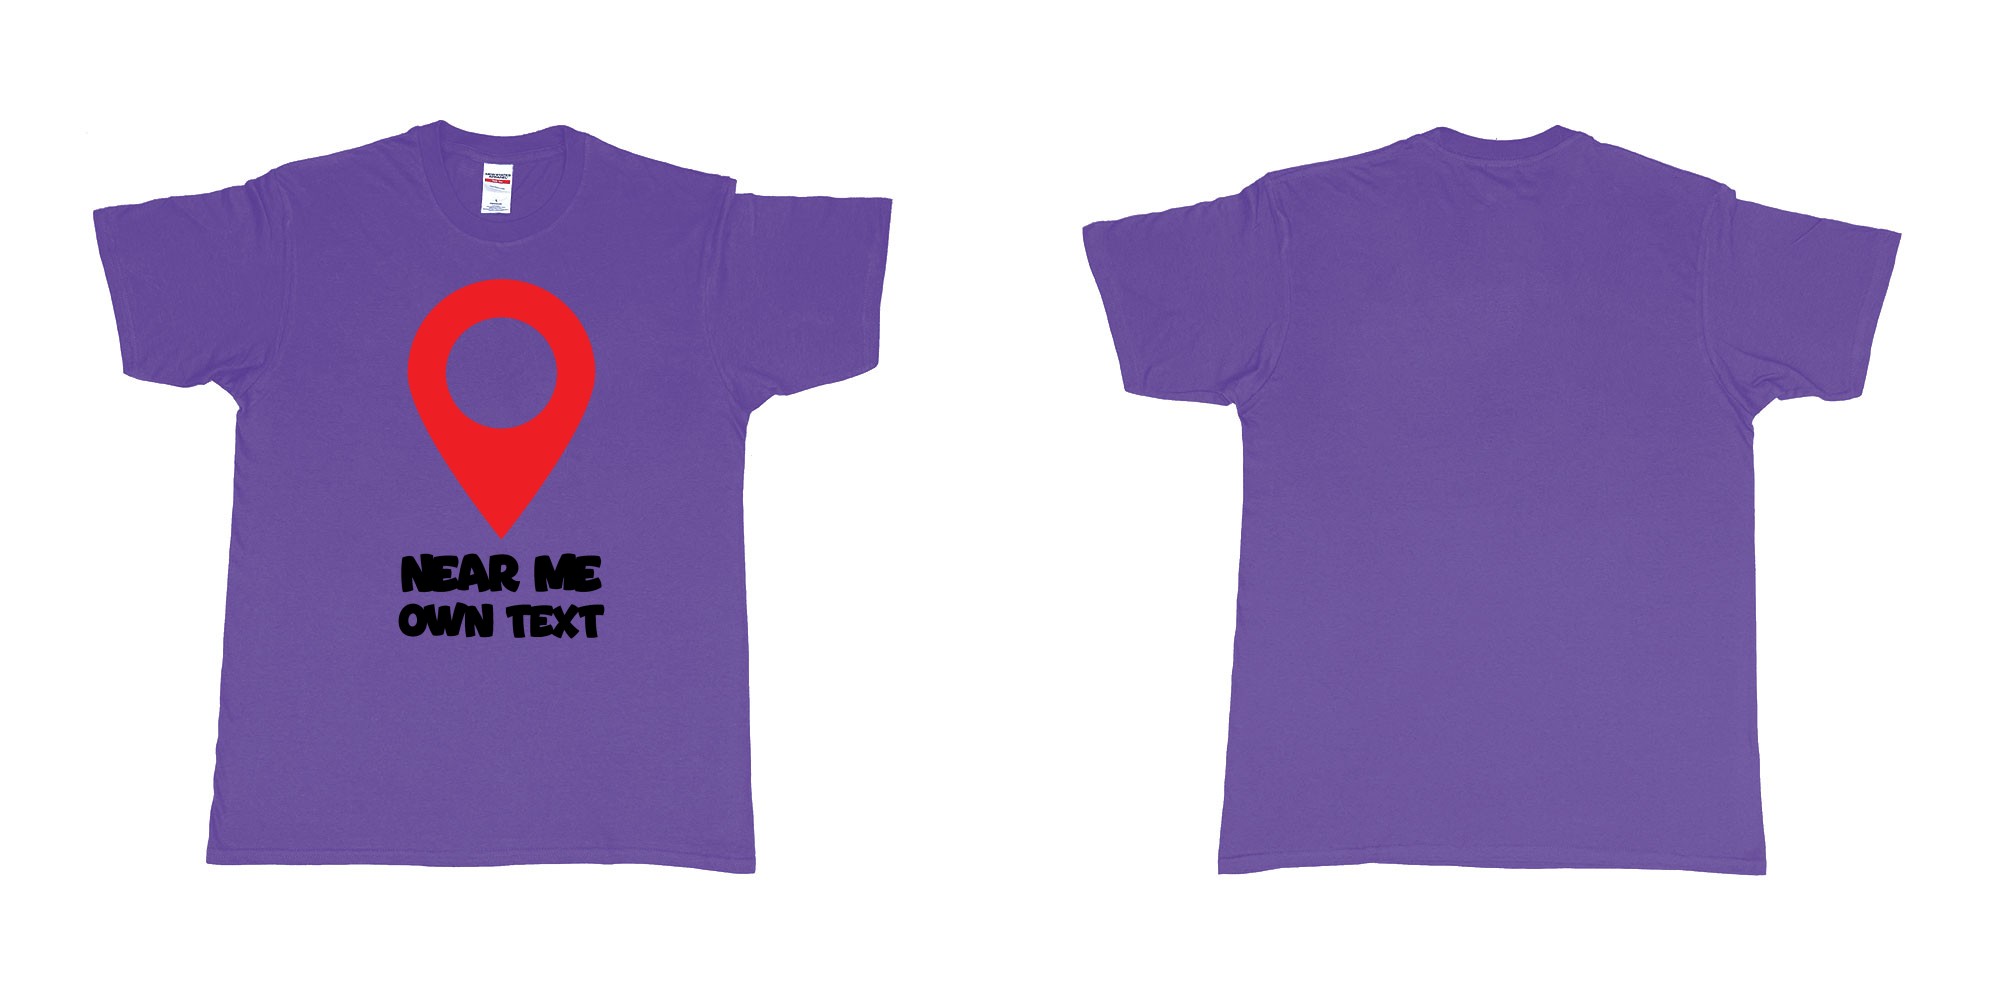 Custom tshirt design tshirt printing near me bali in fabric color purple choice your own text made in Bali by The Pirate Way